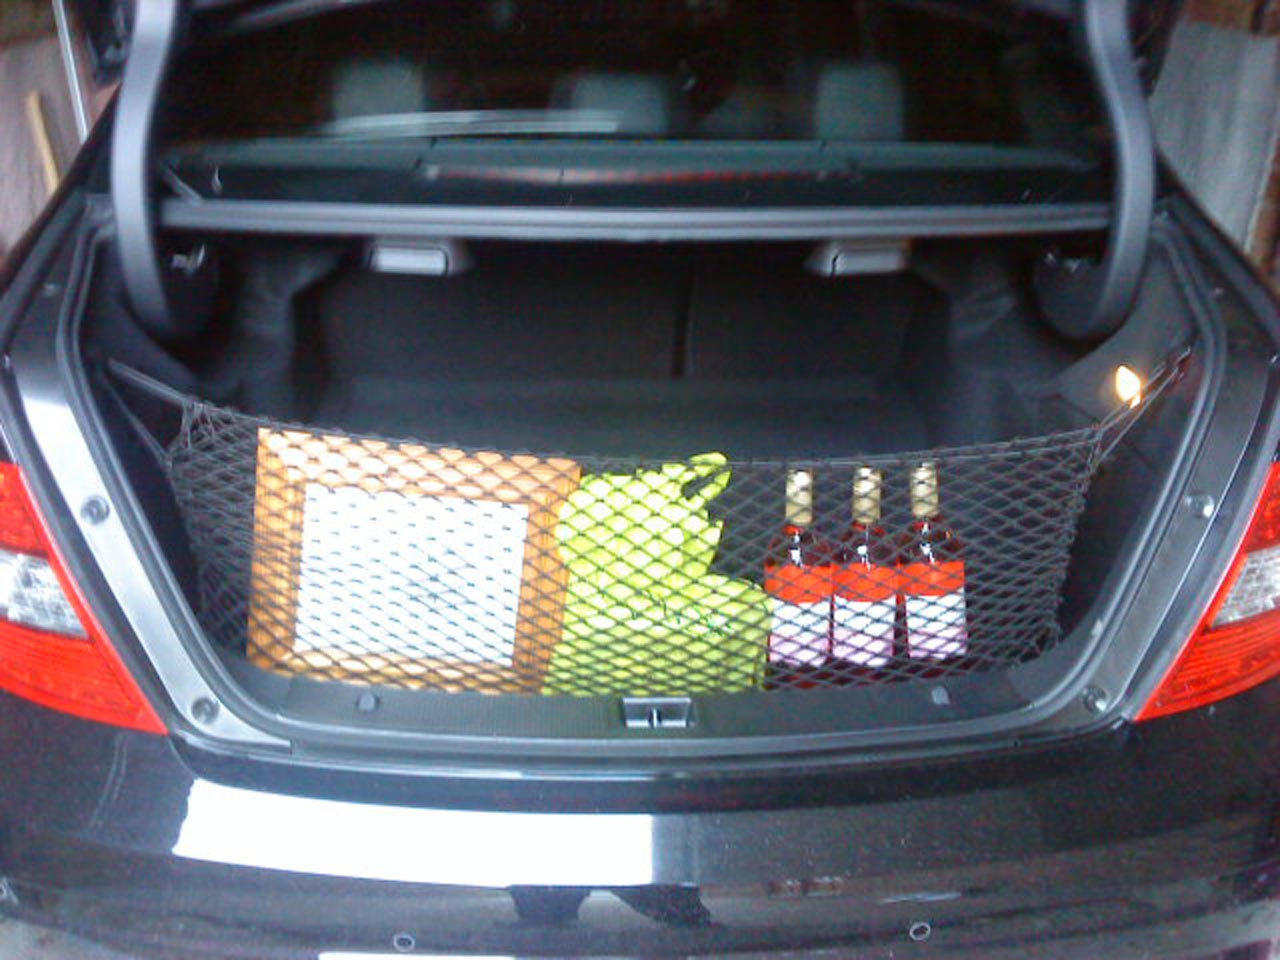 Elastic net in a car boot to help with the organisation and storage of groceries and other small items.